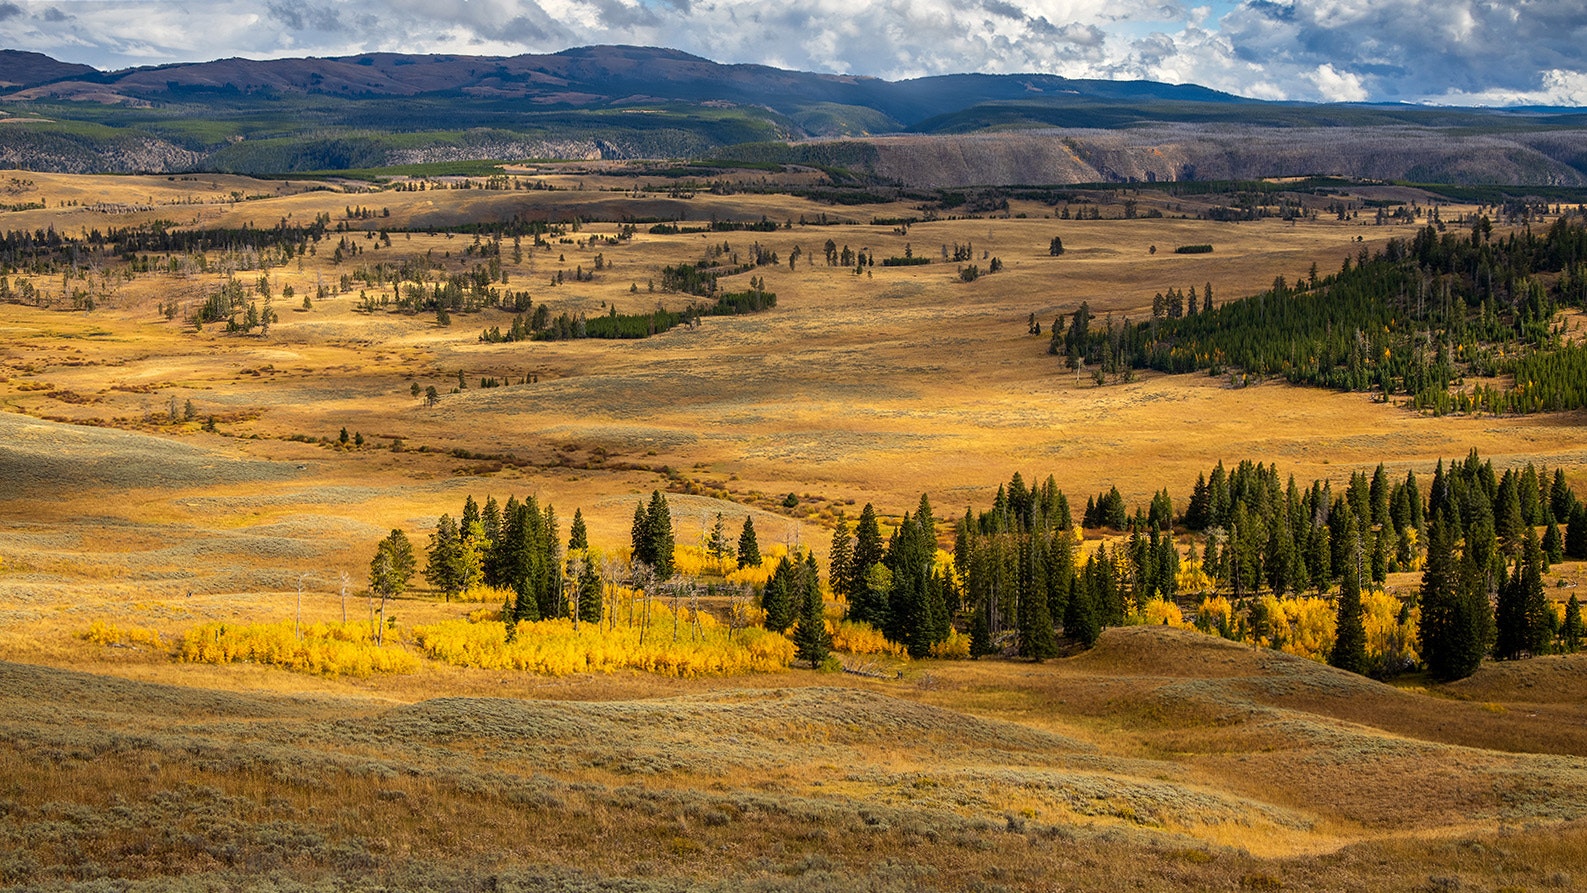 October is prime fall colors viewing season around Yellowstone National Park.